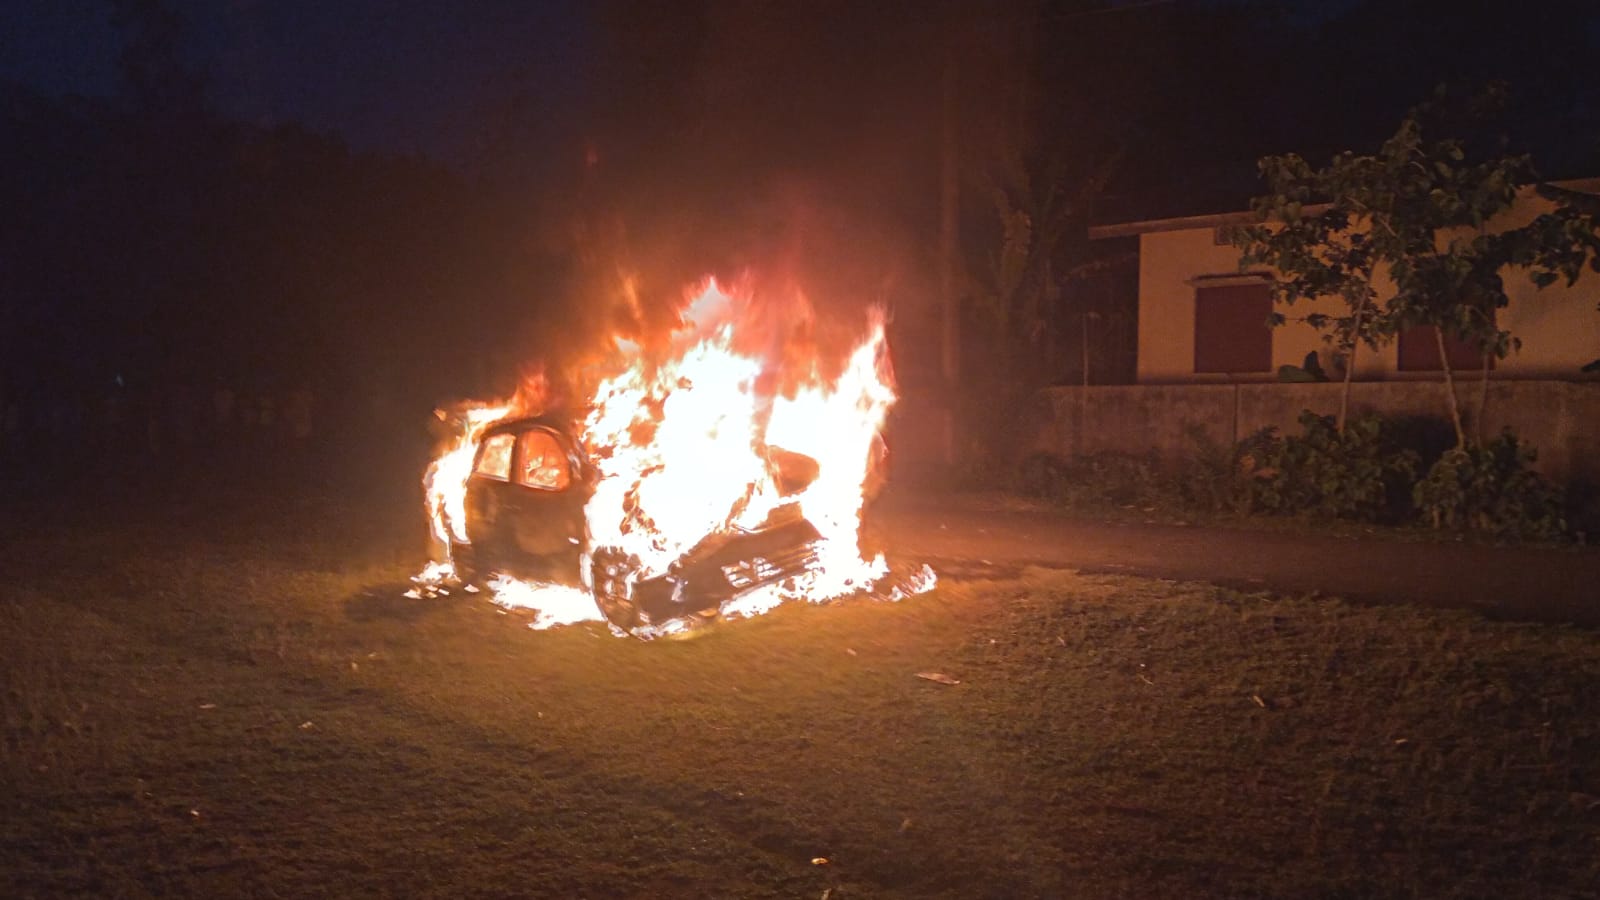 angry people burnt two vehicle on suspicion of stealing cows in morigaon